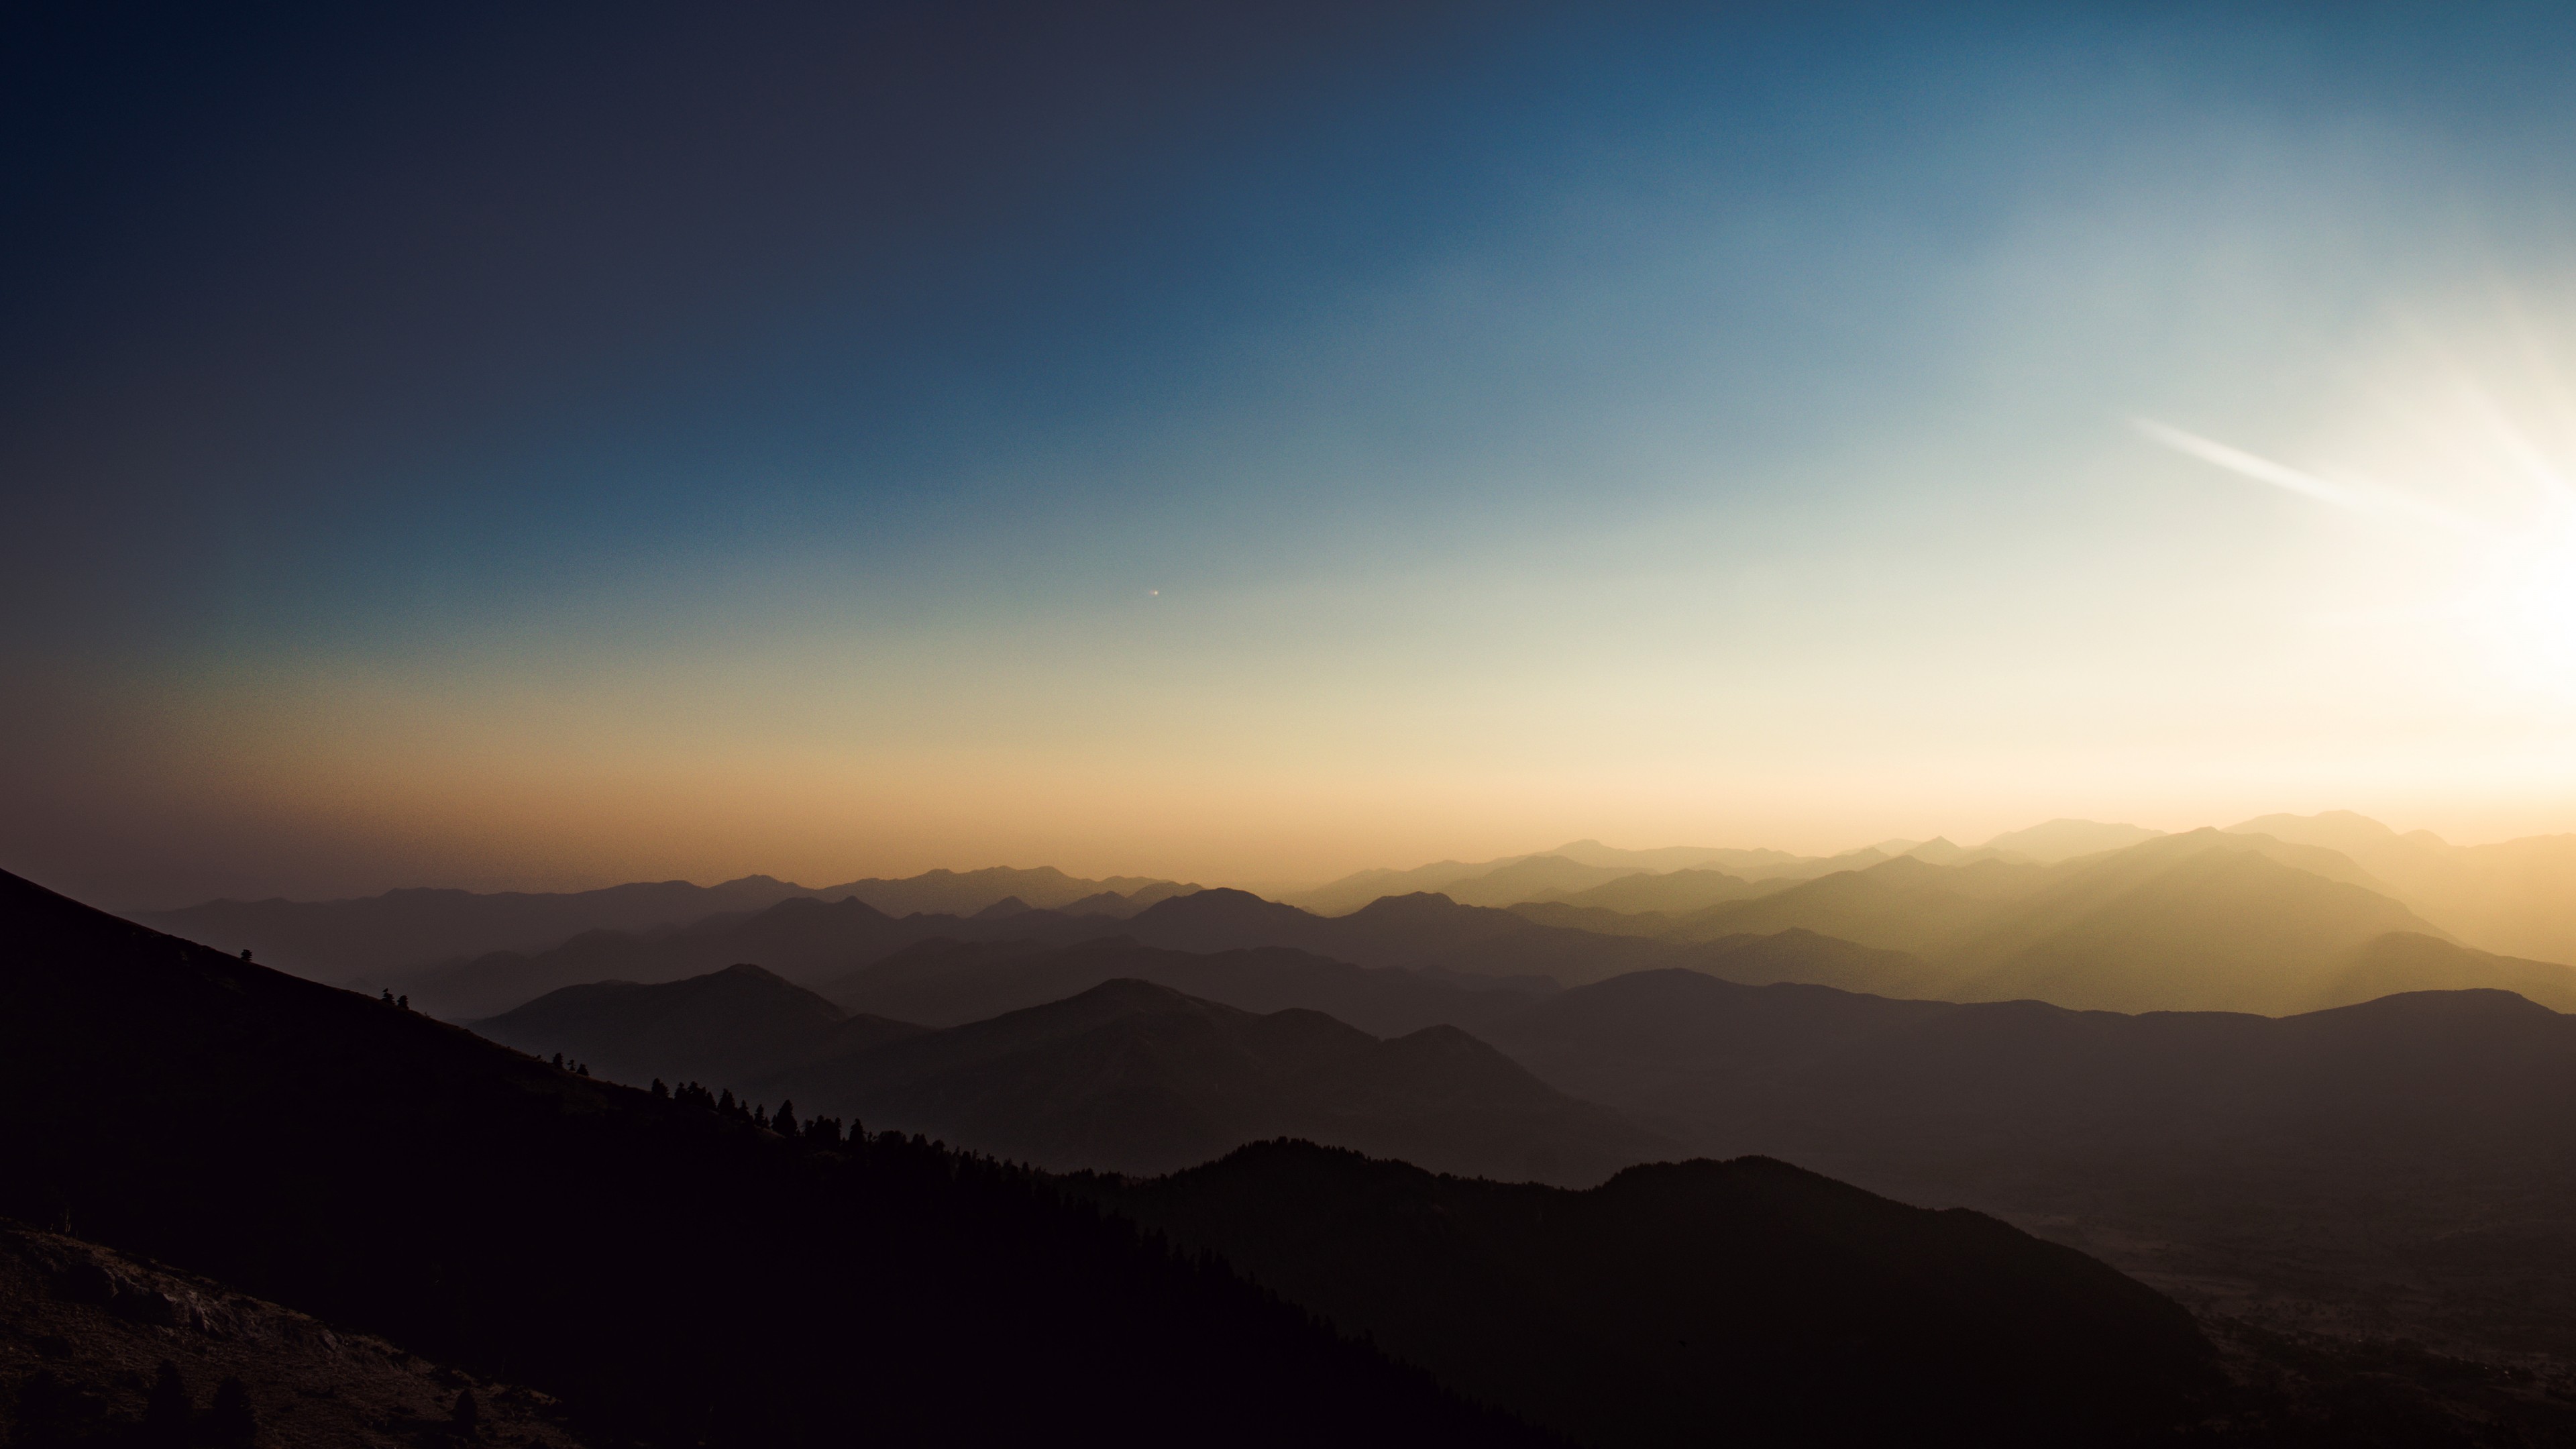 General 3840x2160 mountains sunset nature landscape blue yellow sky